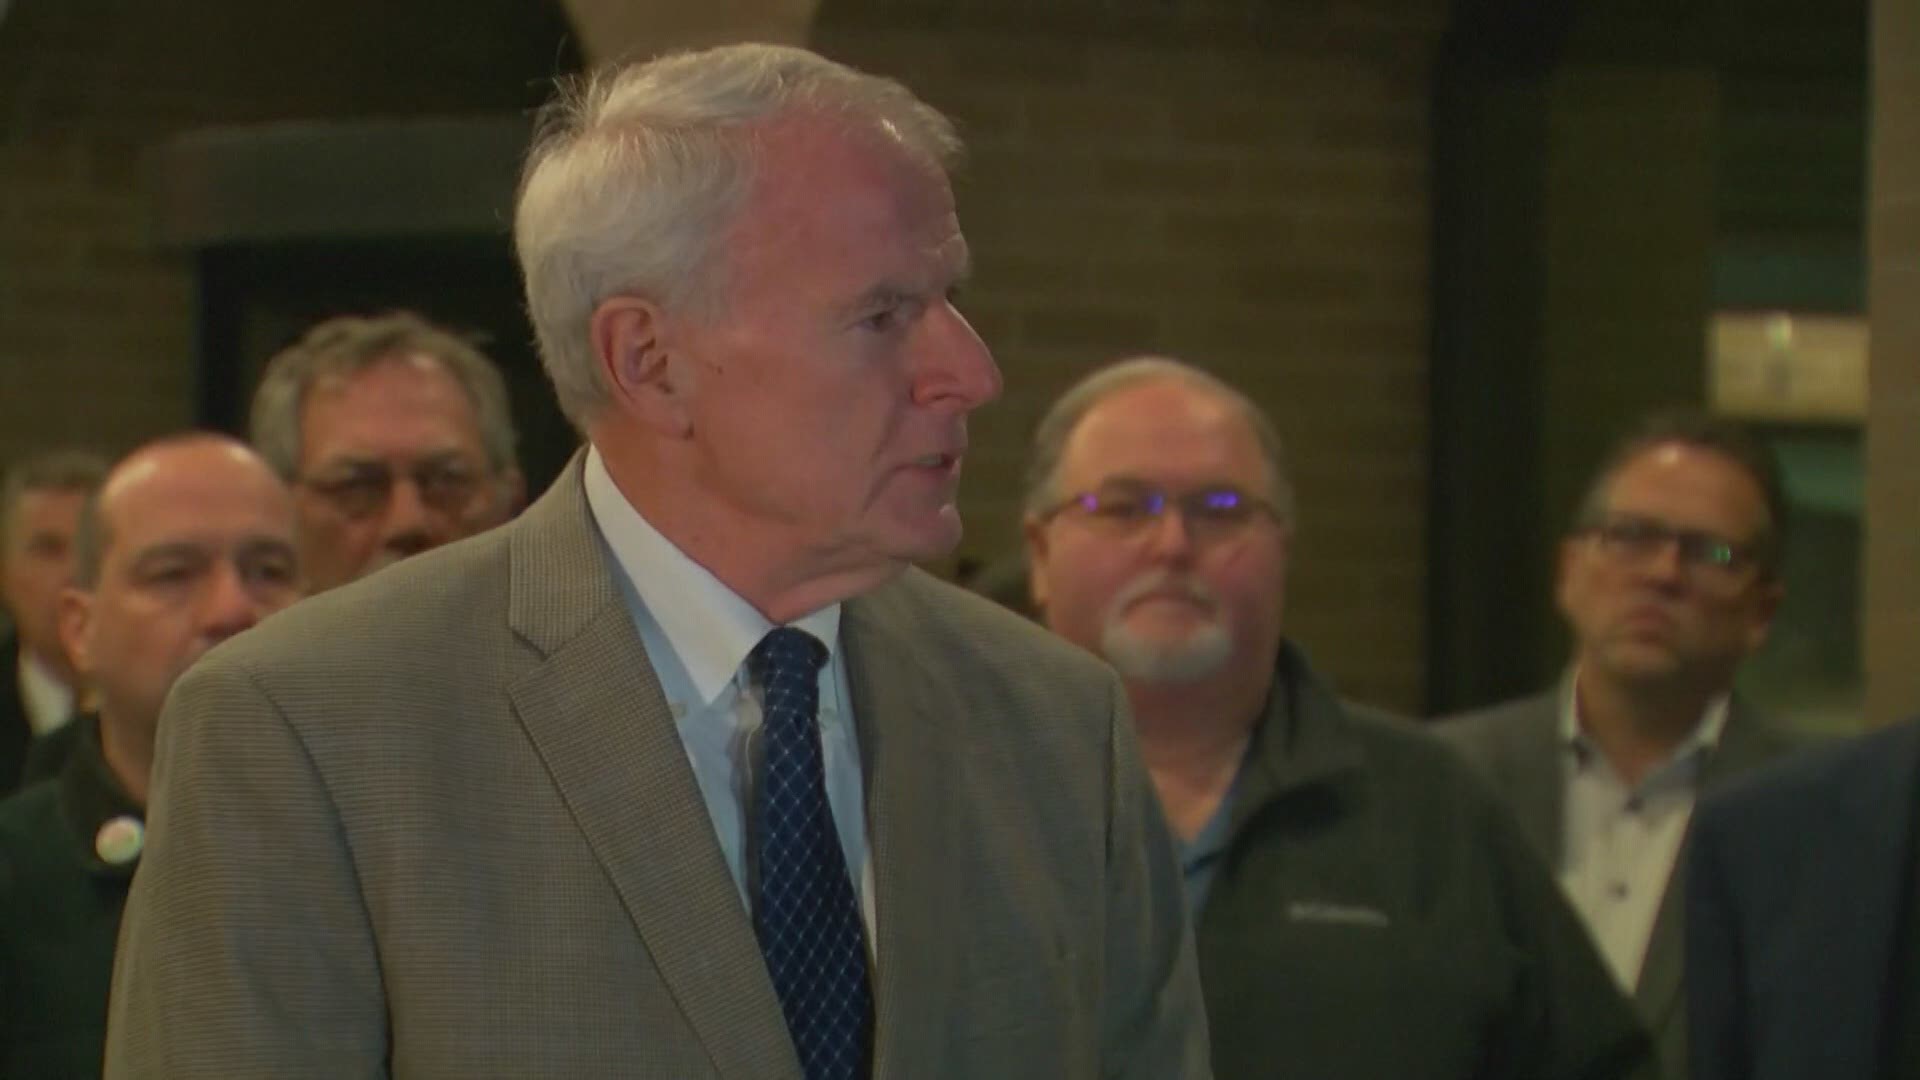 Milwaukee city officials met on Wednesday to give a press conference on the shooting at a Molson Coors.